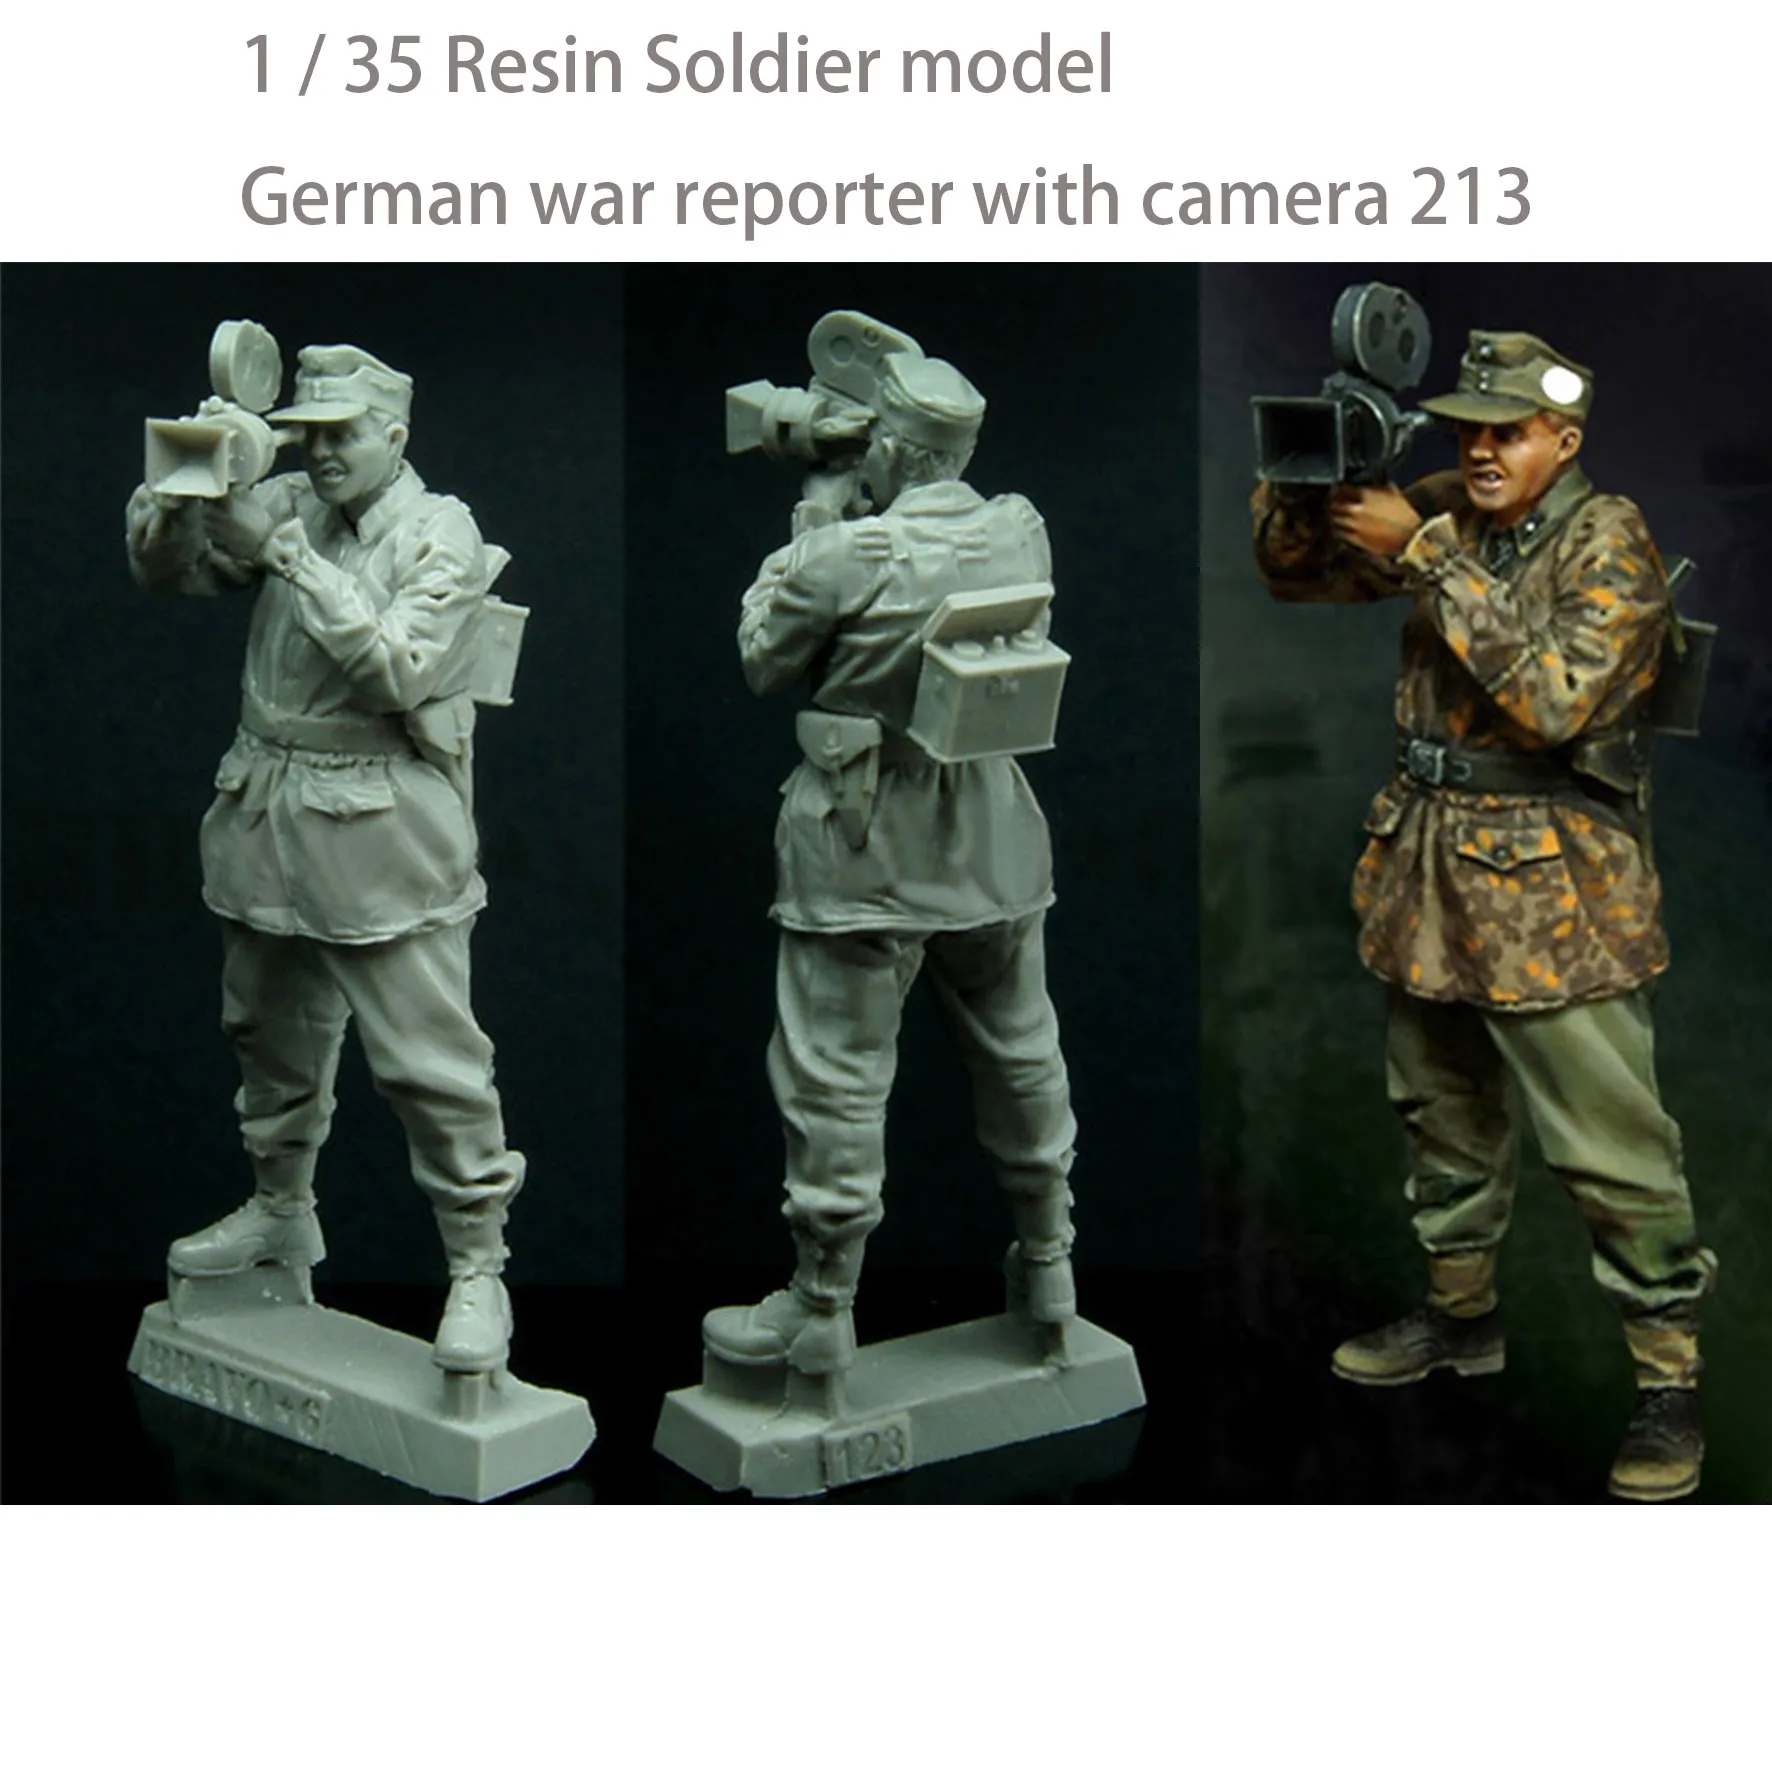 

1 / 35 Resin Soldier model German war reporter with camera 213 Uncolored model